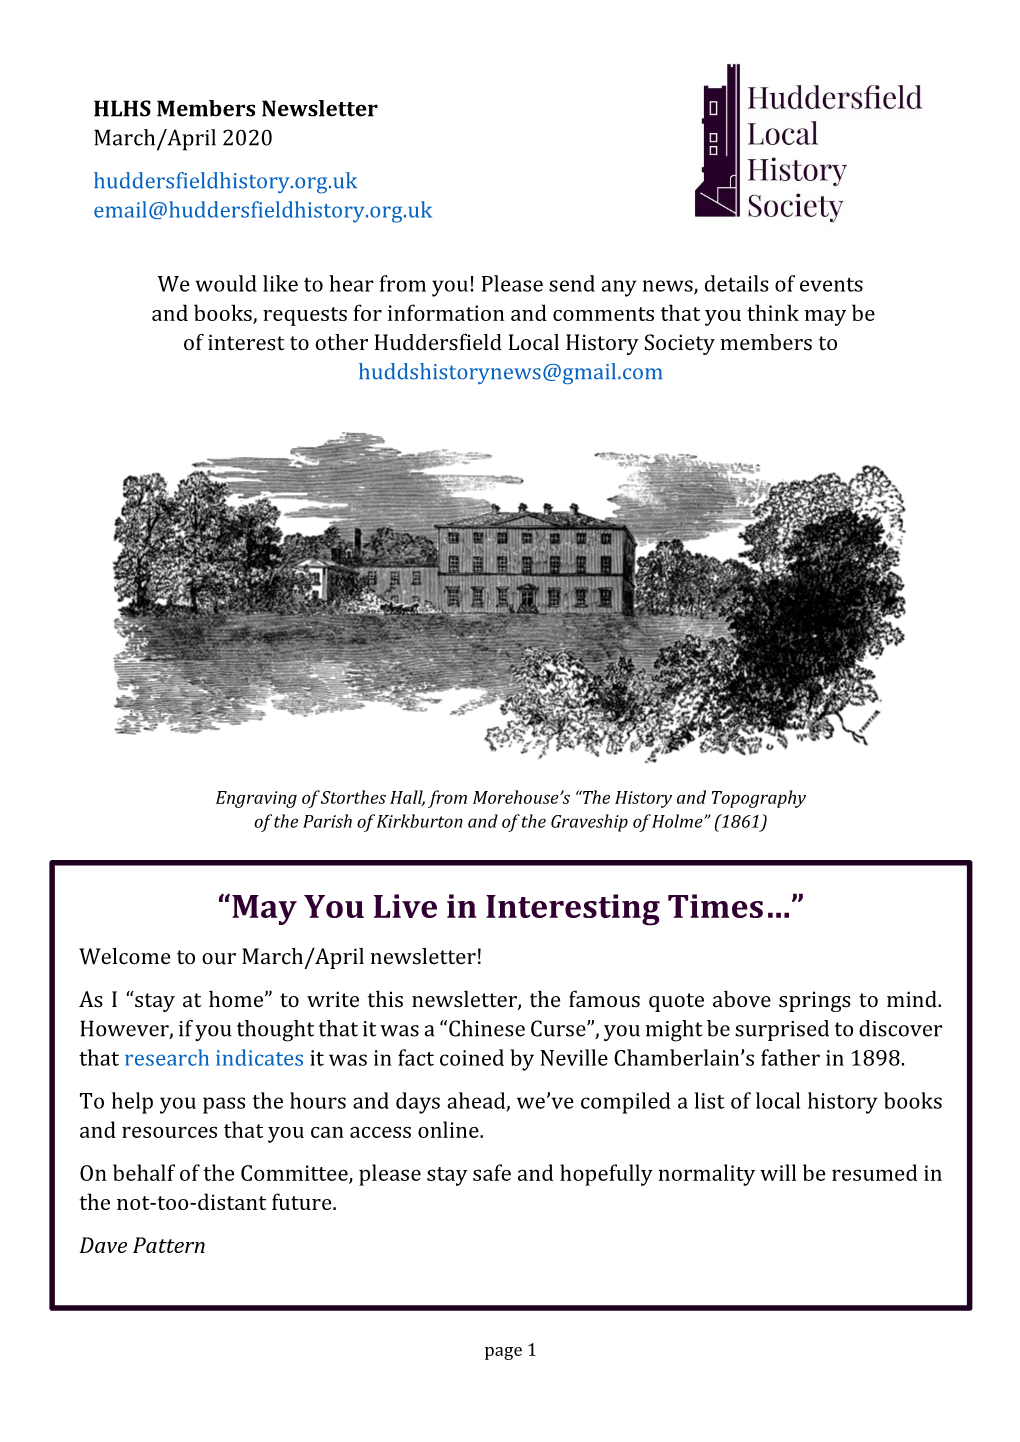 “May You Live in Interesting Times…” Welcome to Our March/April Newsletter! As I “Stay at Home” to Write This Newsletter, the Famous Quote Above Springs to Mind